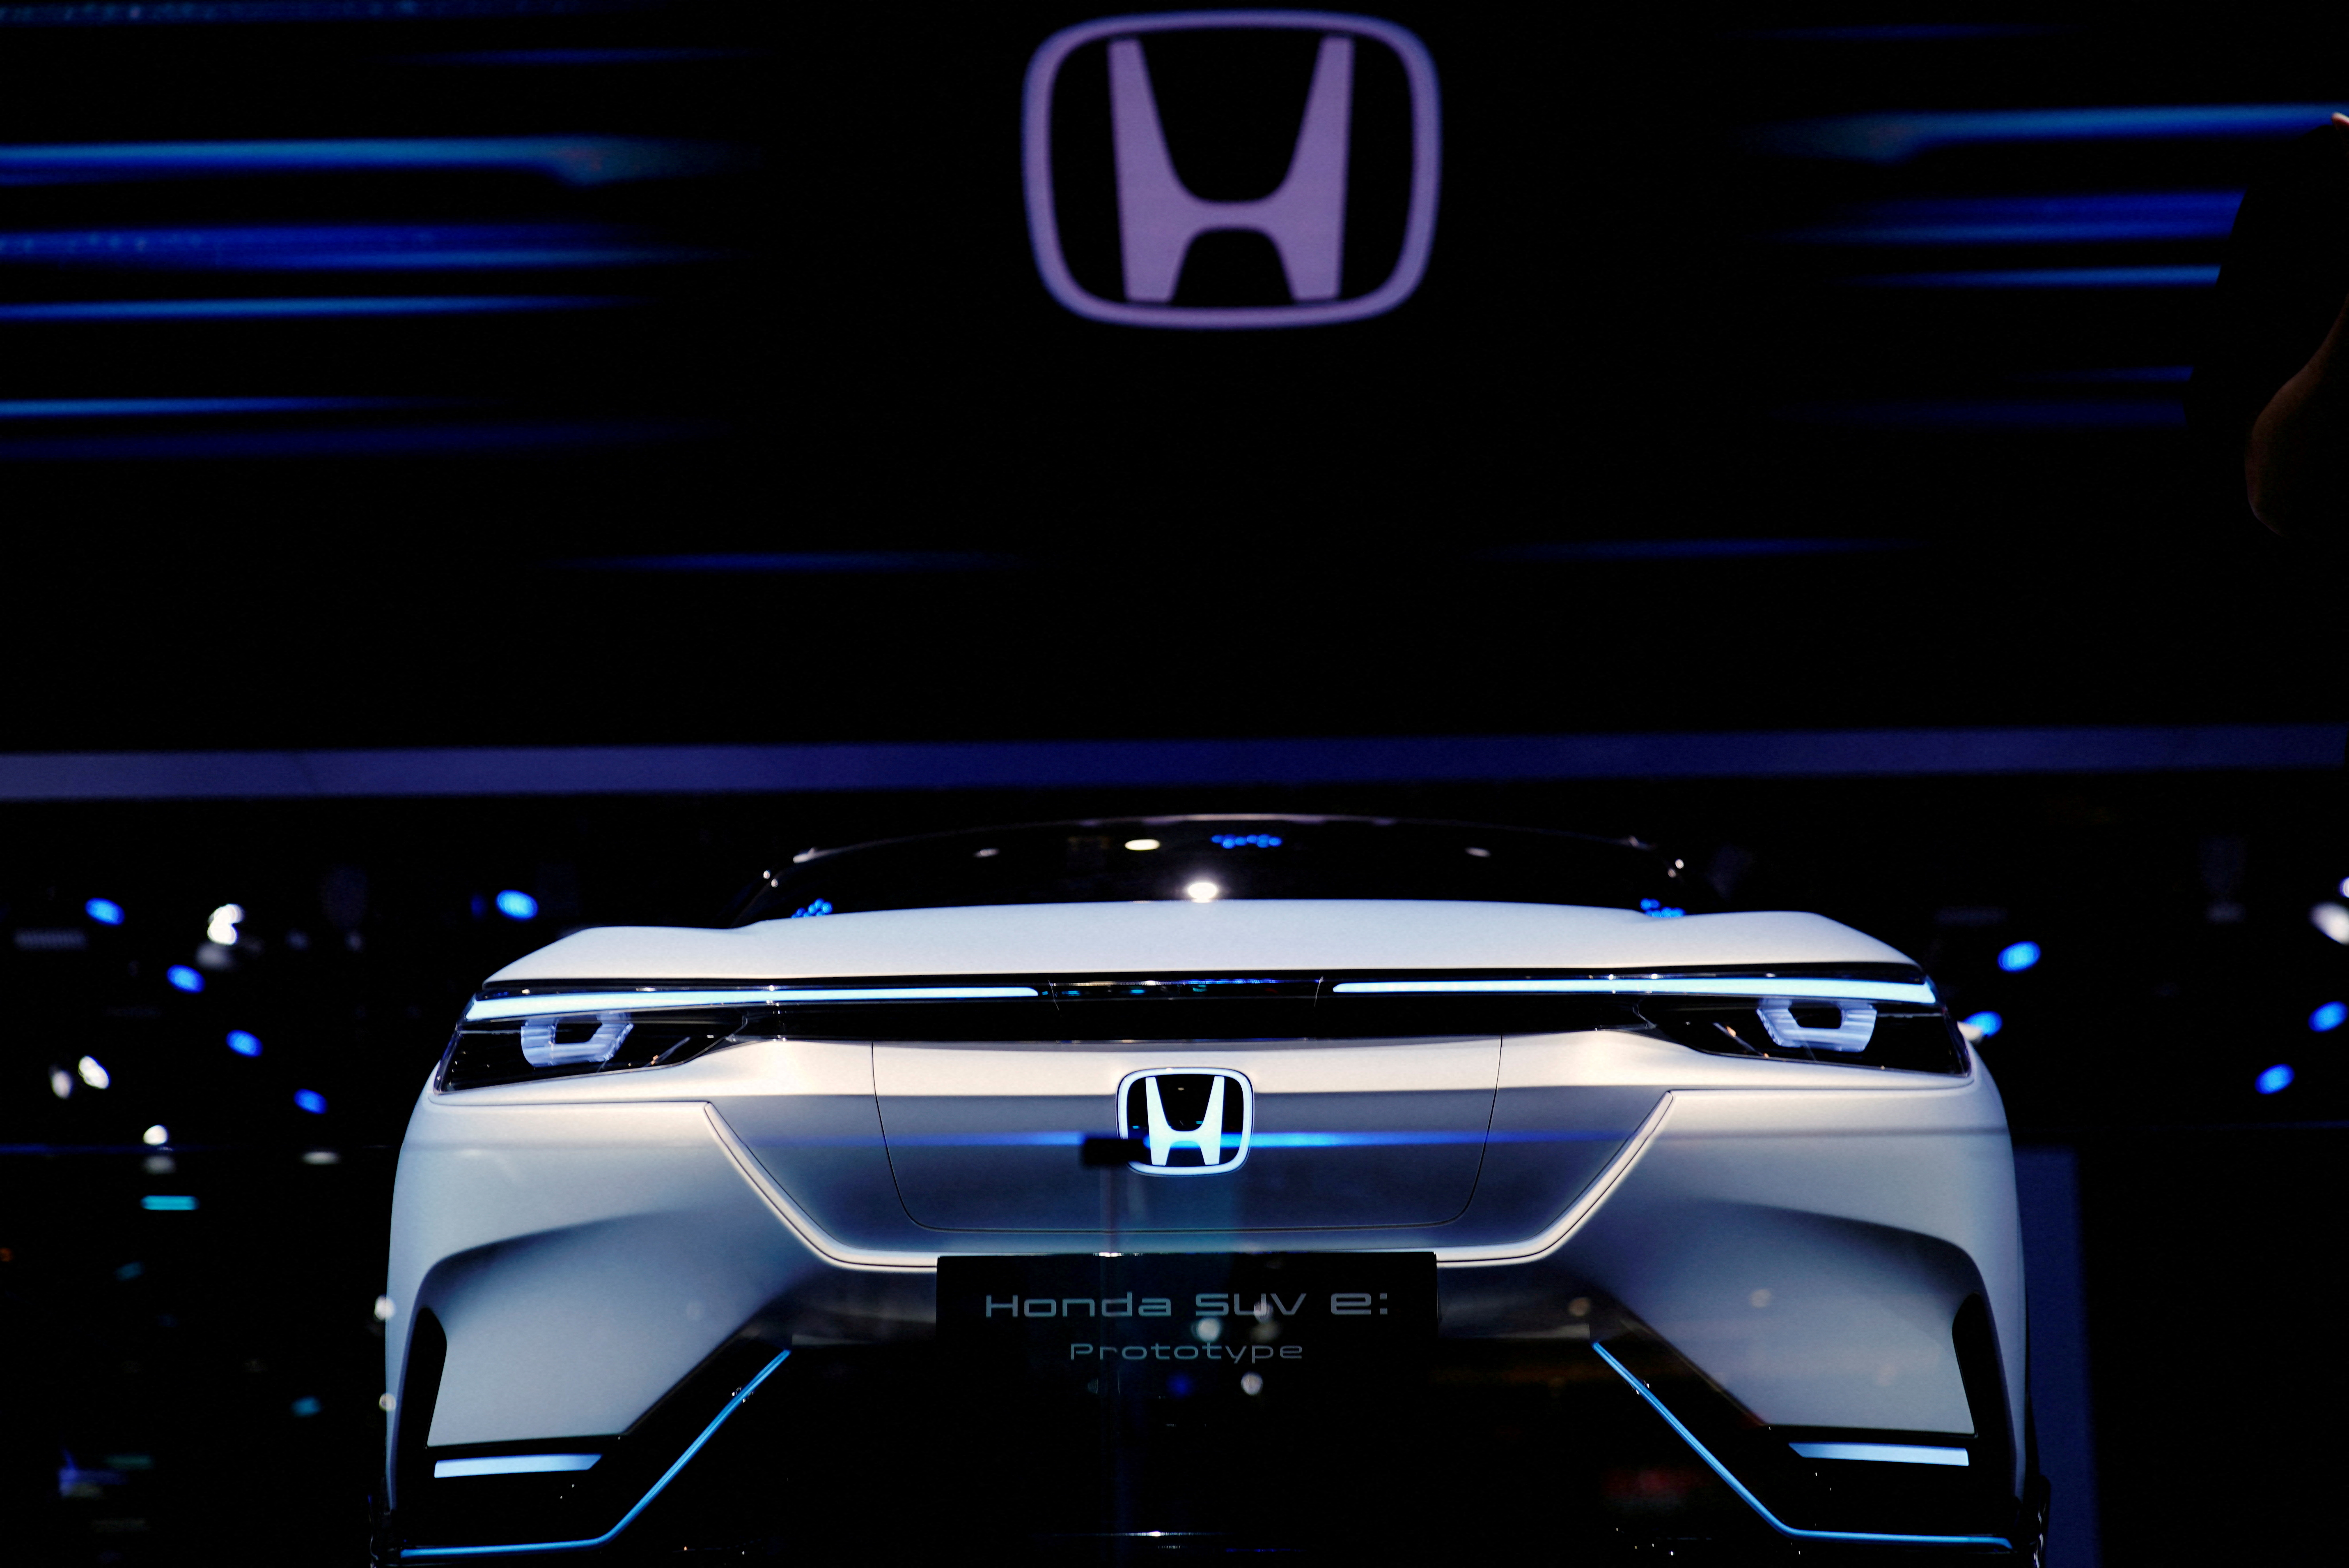 A Honda SUV e:Prototype electric vehicle is seen displayed during a media day for the Auto Shanghai show